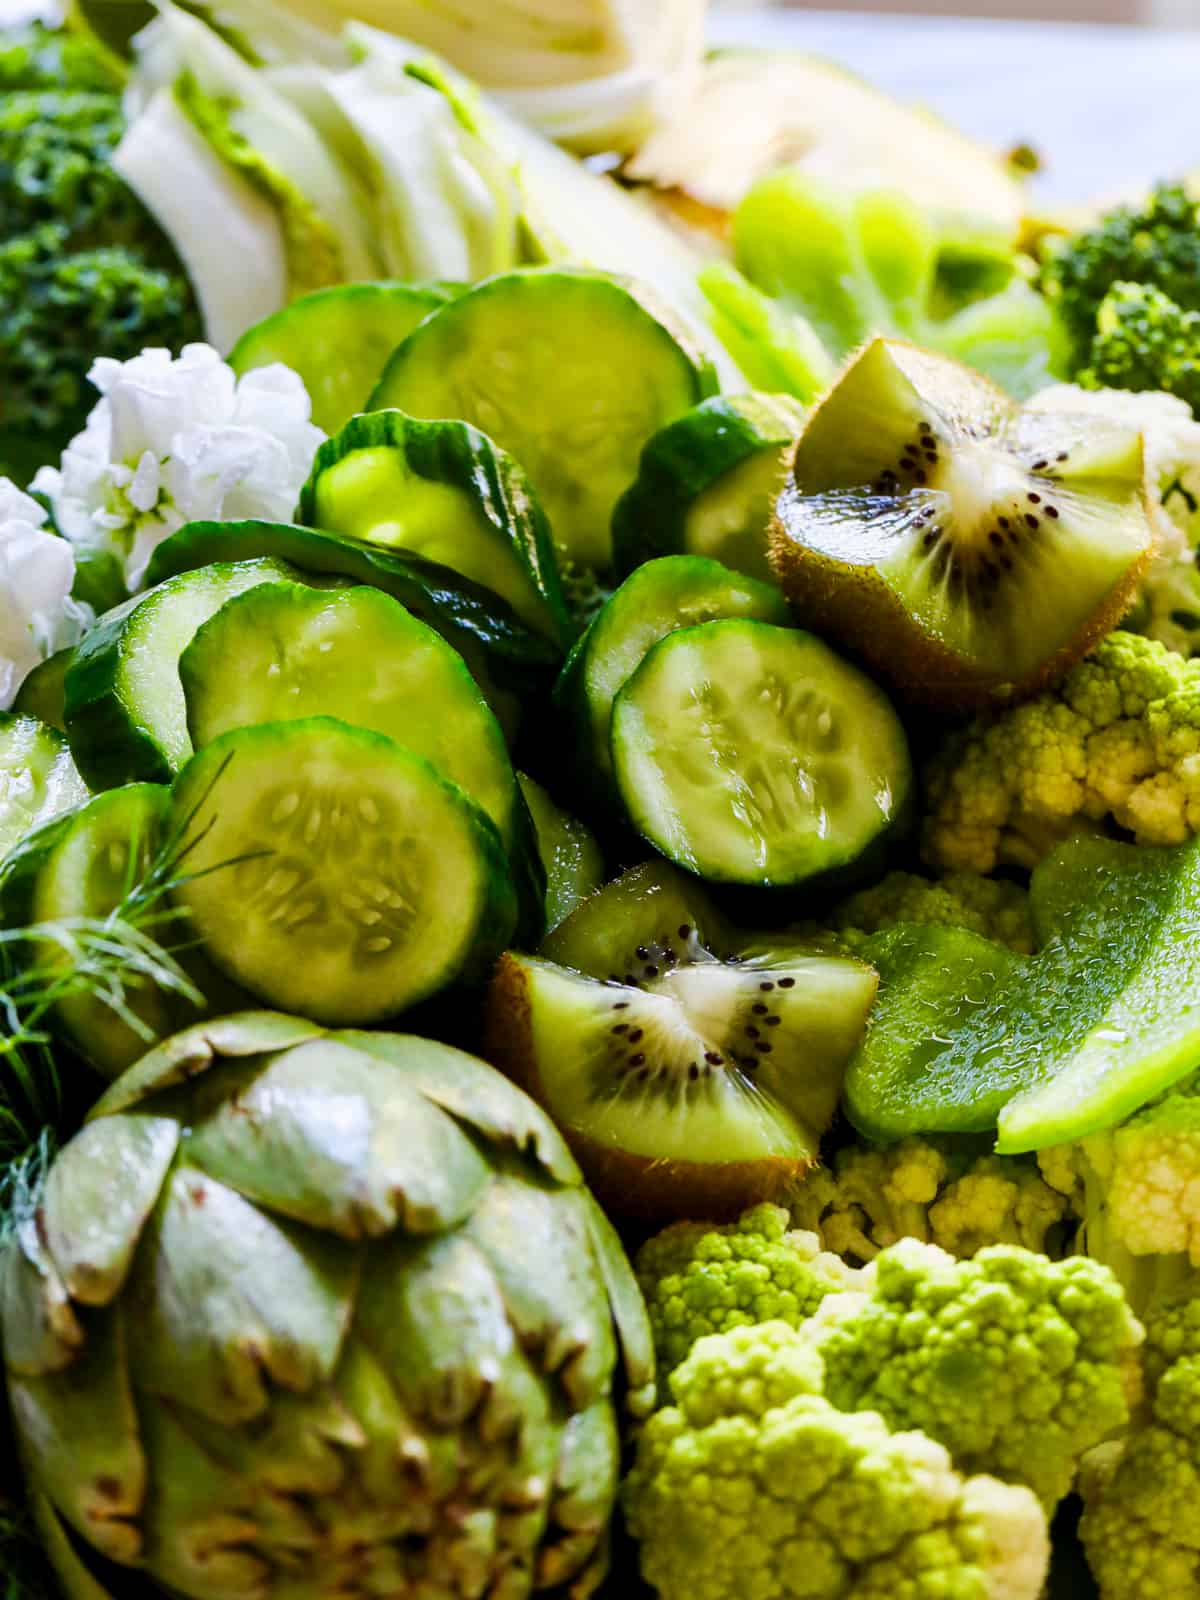 A pile of green vegetables on a tray with slices of cucumber, kiwi, artichokes and more.